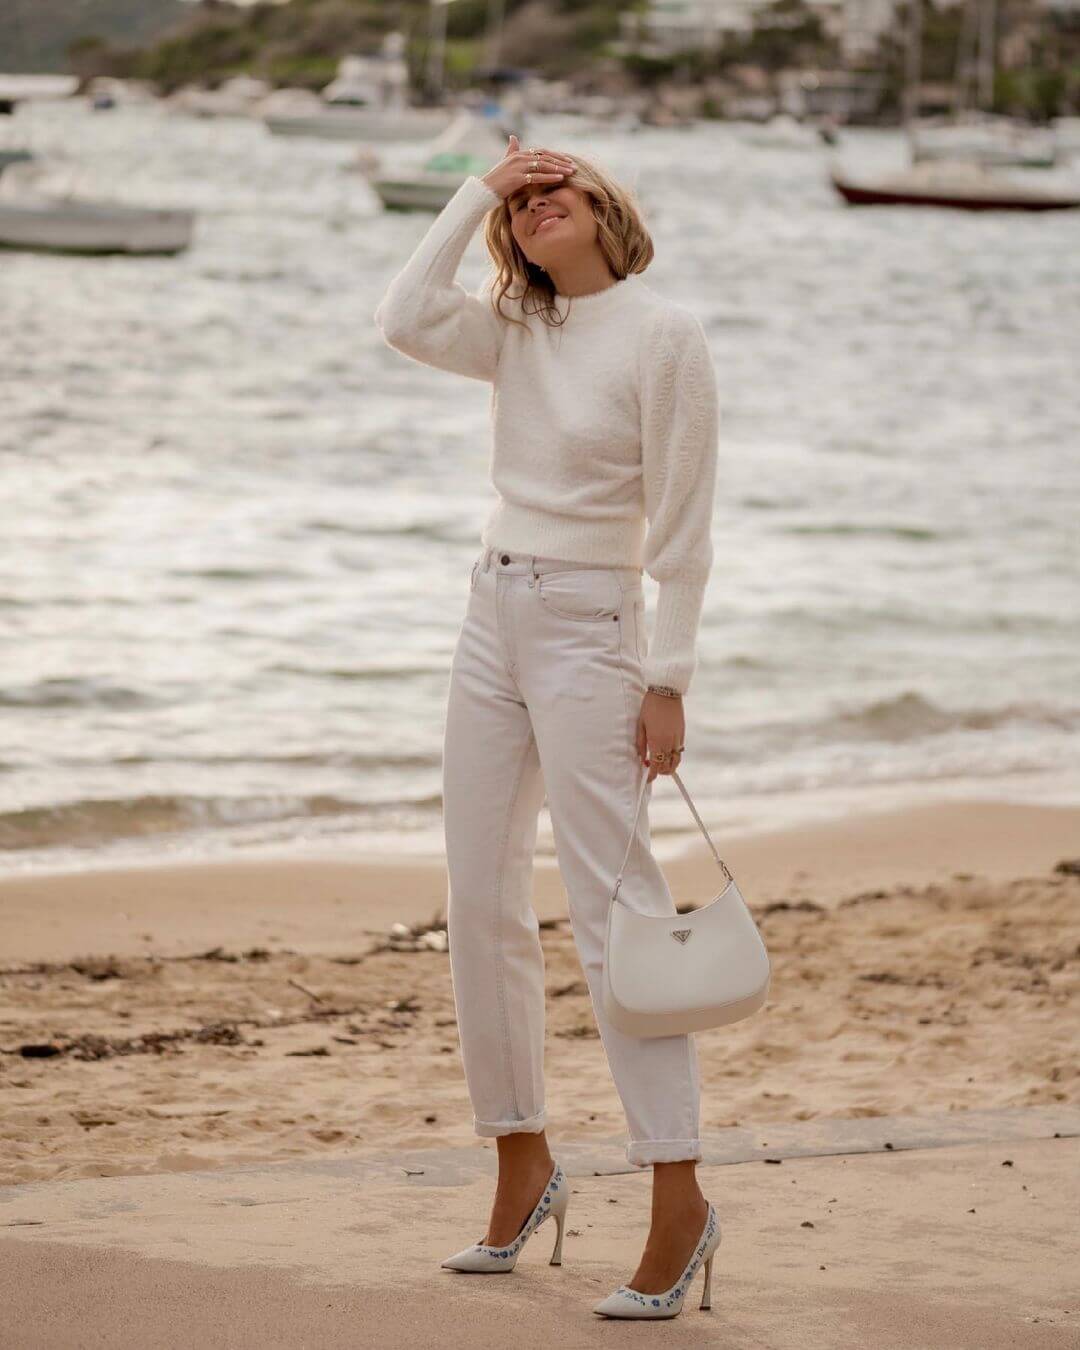 10 Refreshing Ways To Wear White Jeans After Labor Day